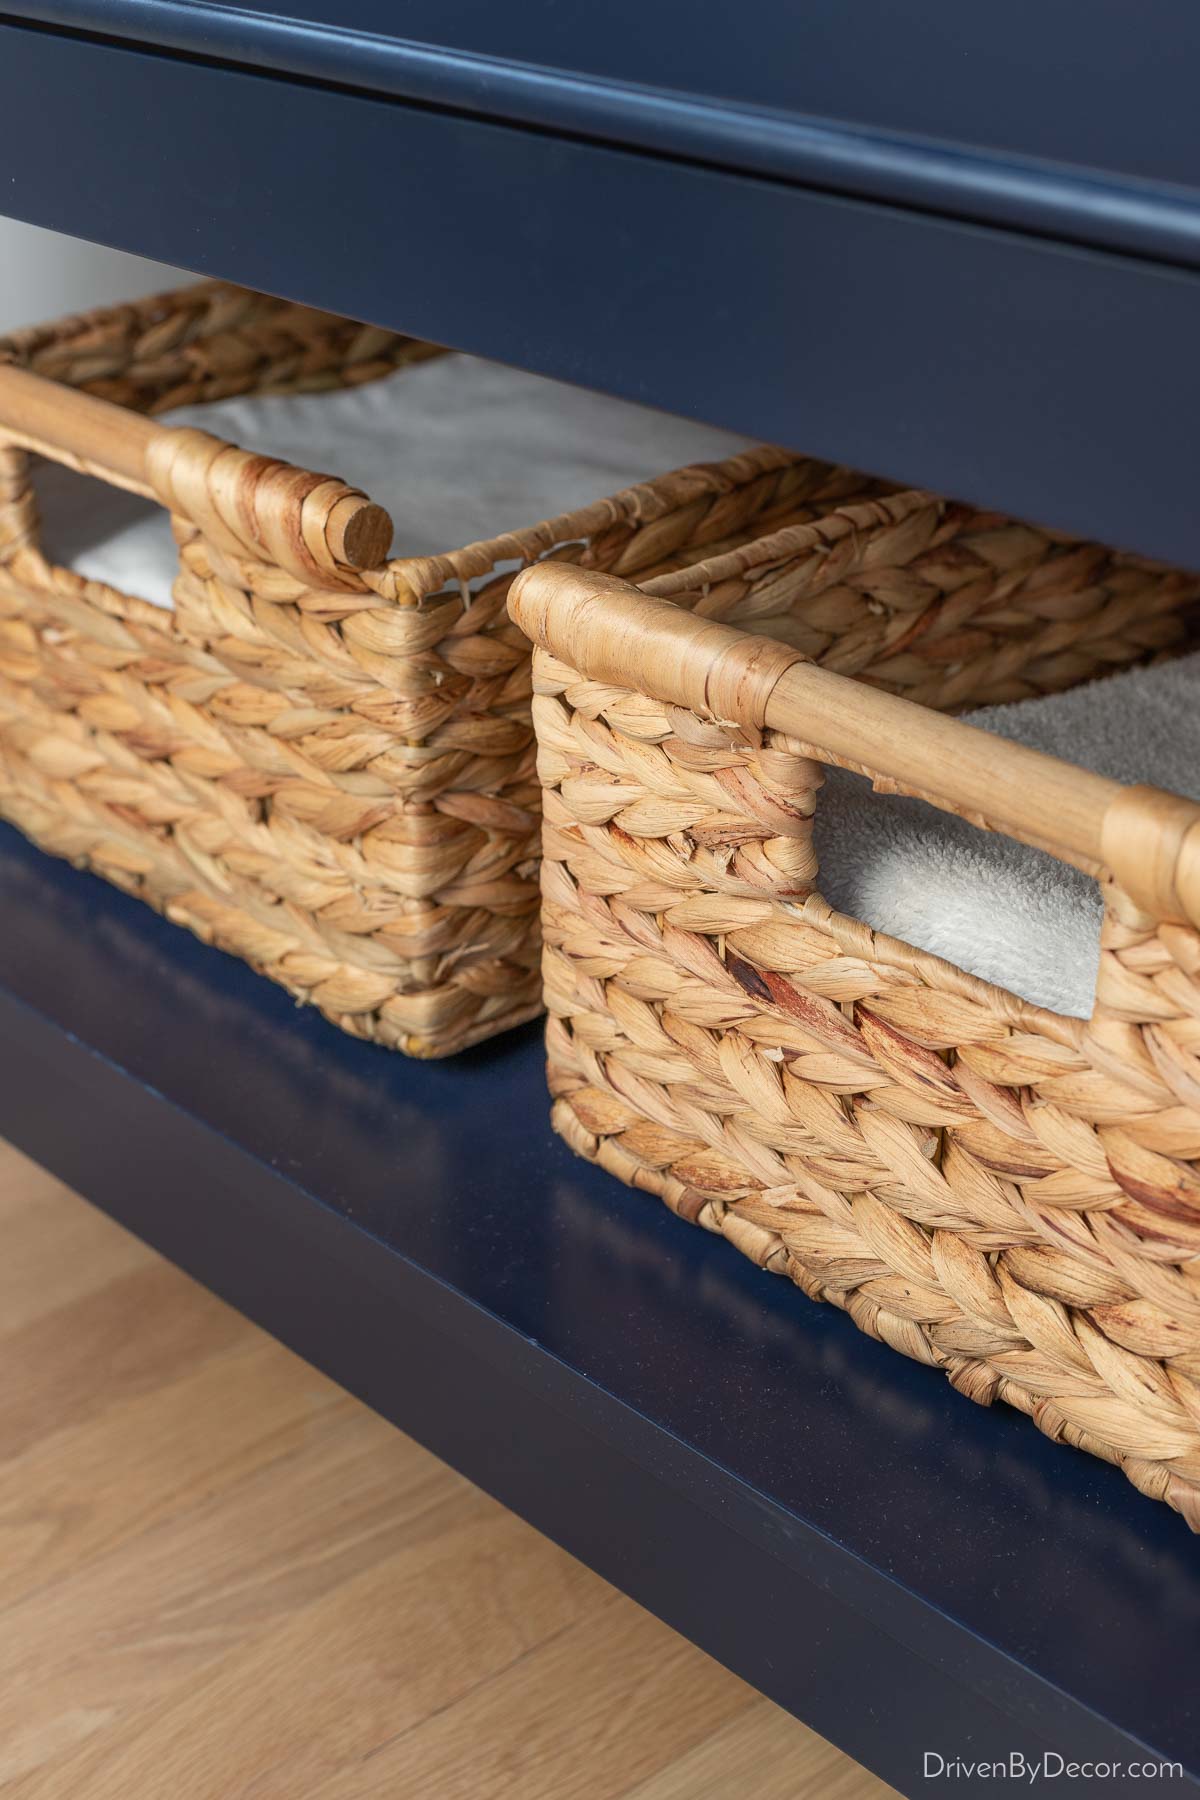 Woven baskets on the shelf of our bathroom vanity